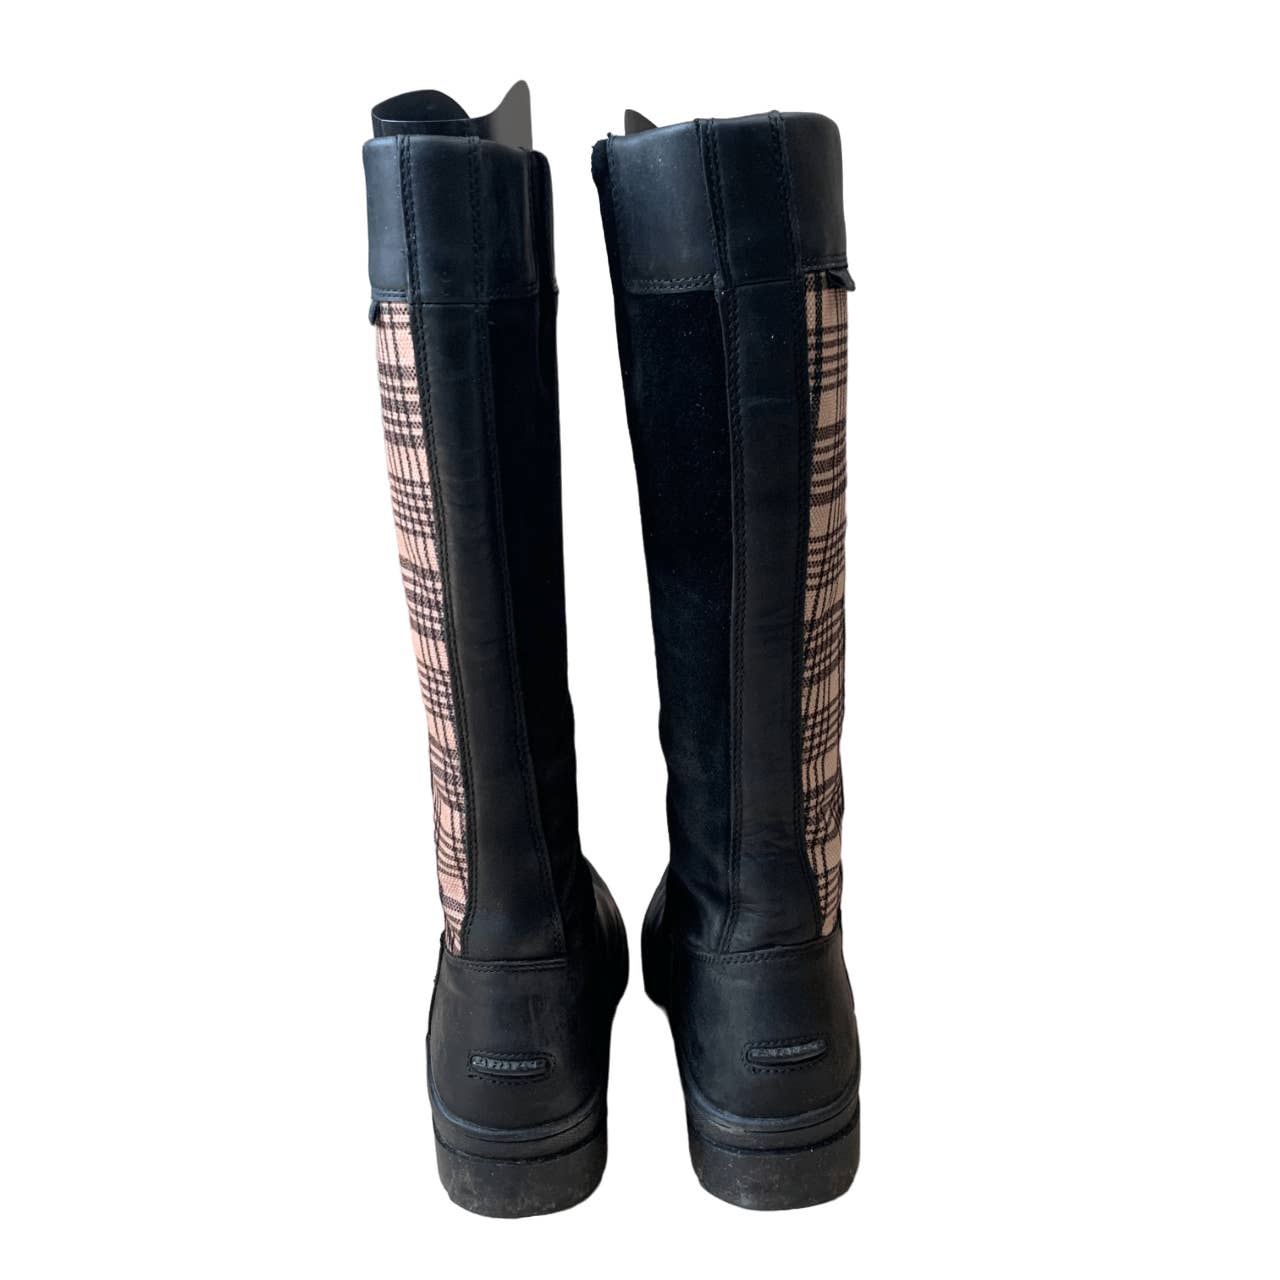 Ariat Windermere Baker Tall Boots in Black - Woman's 8B